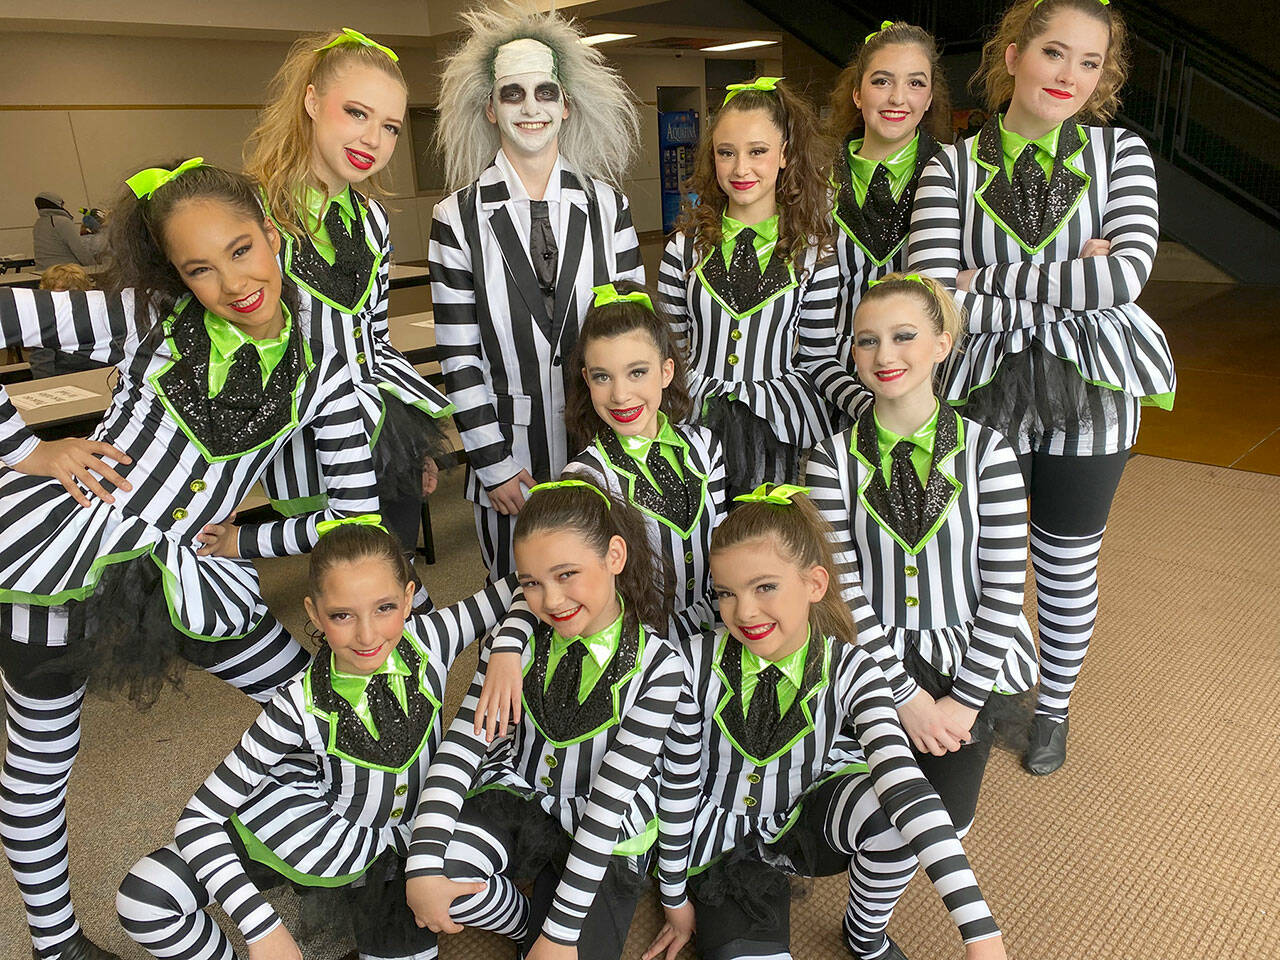 The Elite Competition Dance Team from The Dance Center by Erica Edwards in Sequim recently earned a Judge’s Choice award and an invitation to perform in New York City for their musical theater large group routine “Beetlejuice.” Team members include, in no particular order, Madison Edwards, Ayla Alstrup, Sofia Divinsky, Sydney Owens, Cyrus Deede, Eva Lancheros-Gillis, Joyce Caulfield, Ava Fuller, Emma Edwards, Mia Buhrer, Addysin Smith, Savanna DeRuyter, Tosca Kattau and Julianne Wilcox. Submitted photo